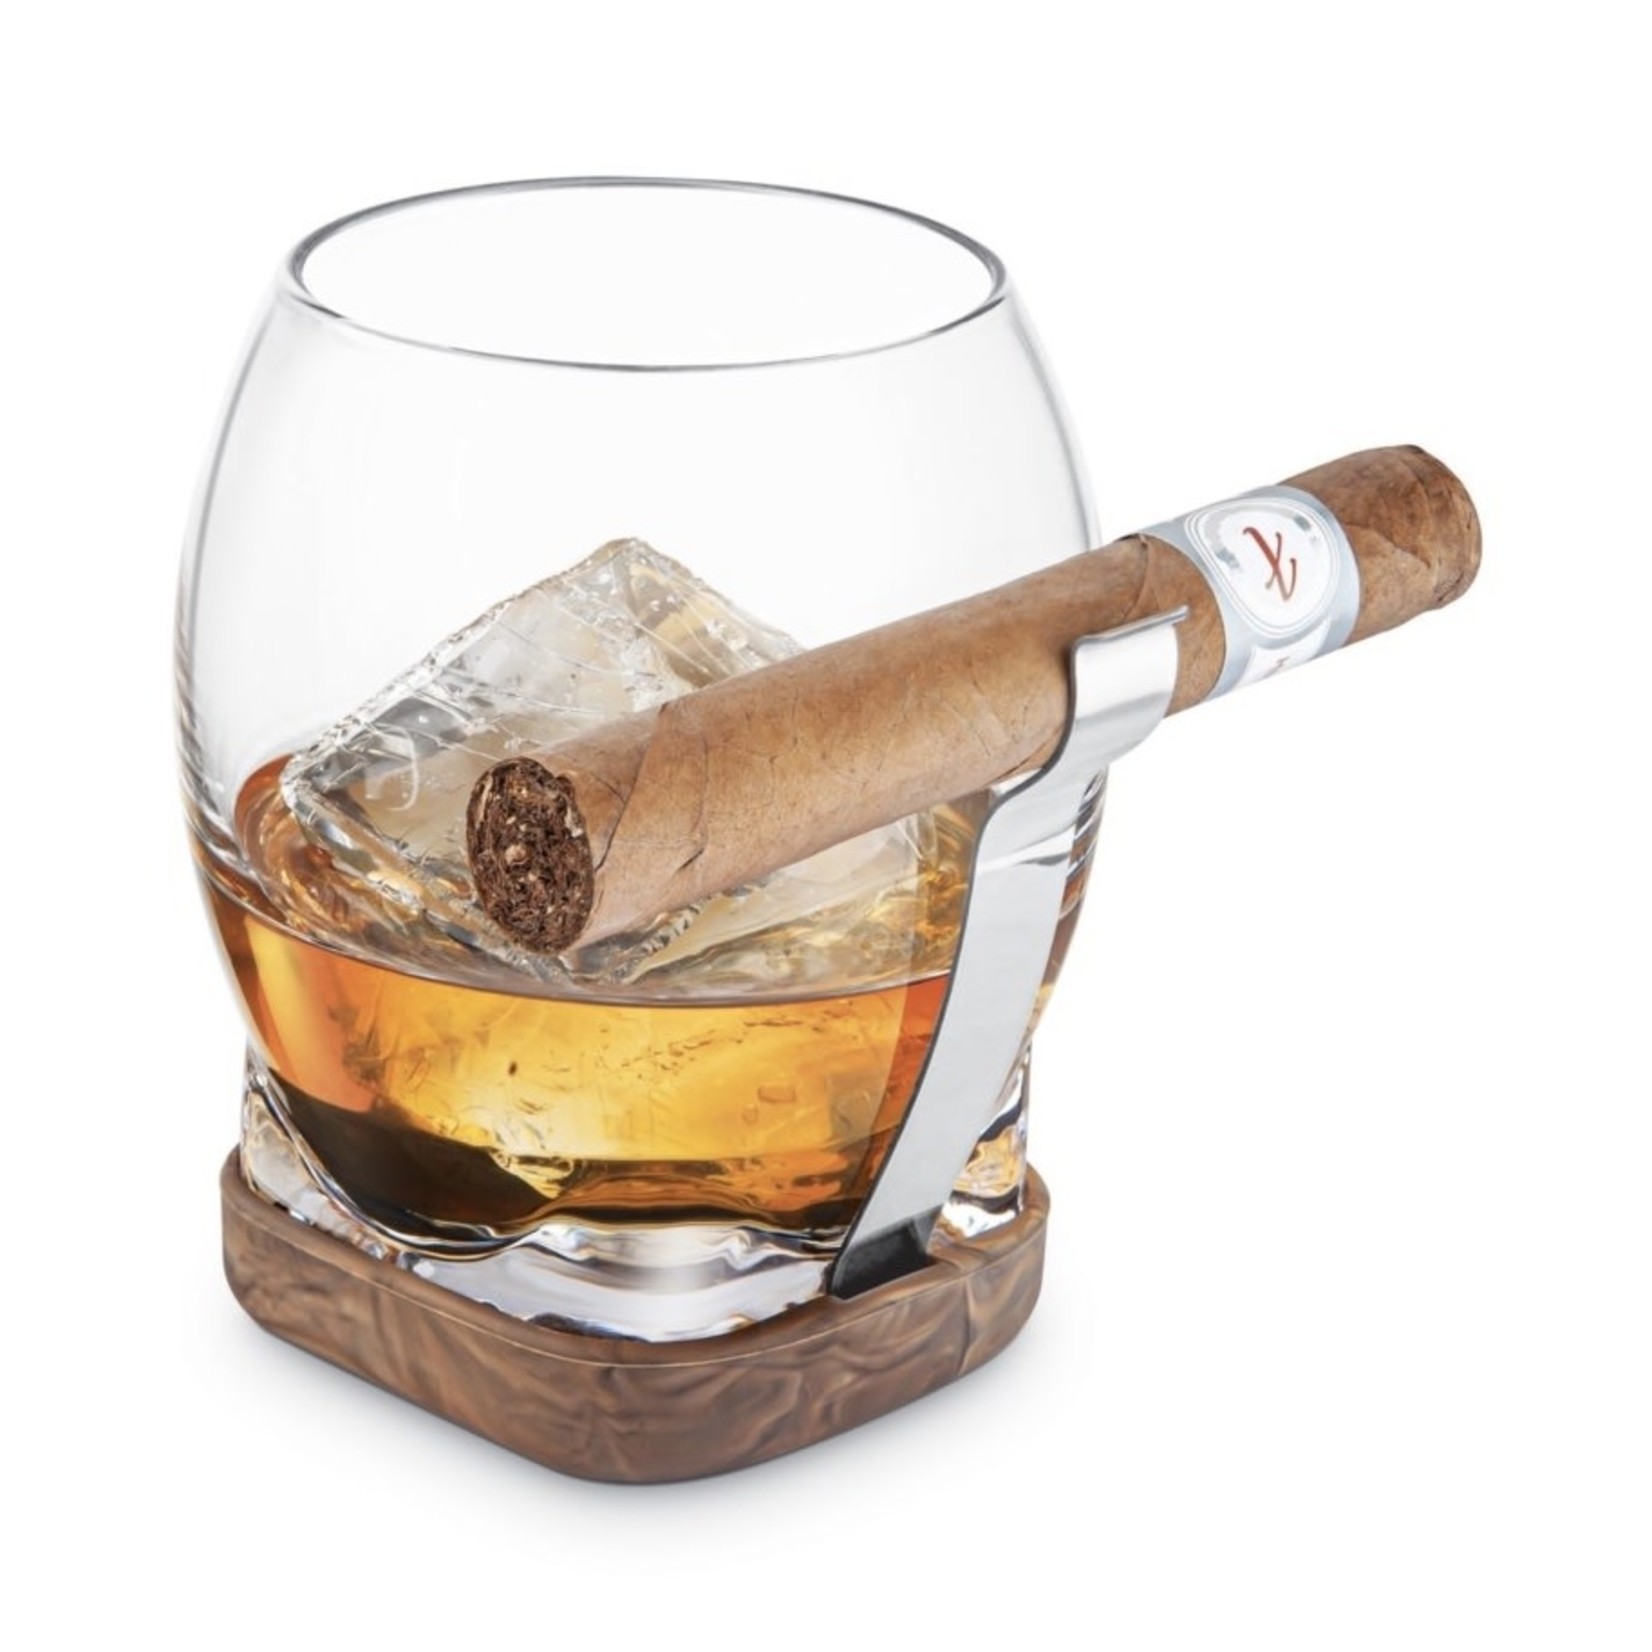 FINAL TOUCH FINAL TOUCH Whiskey Cigar Glass